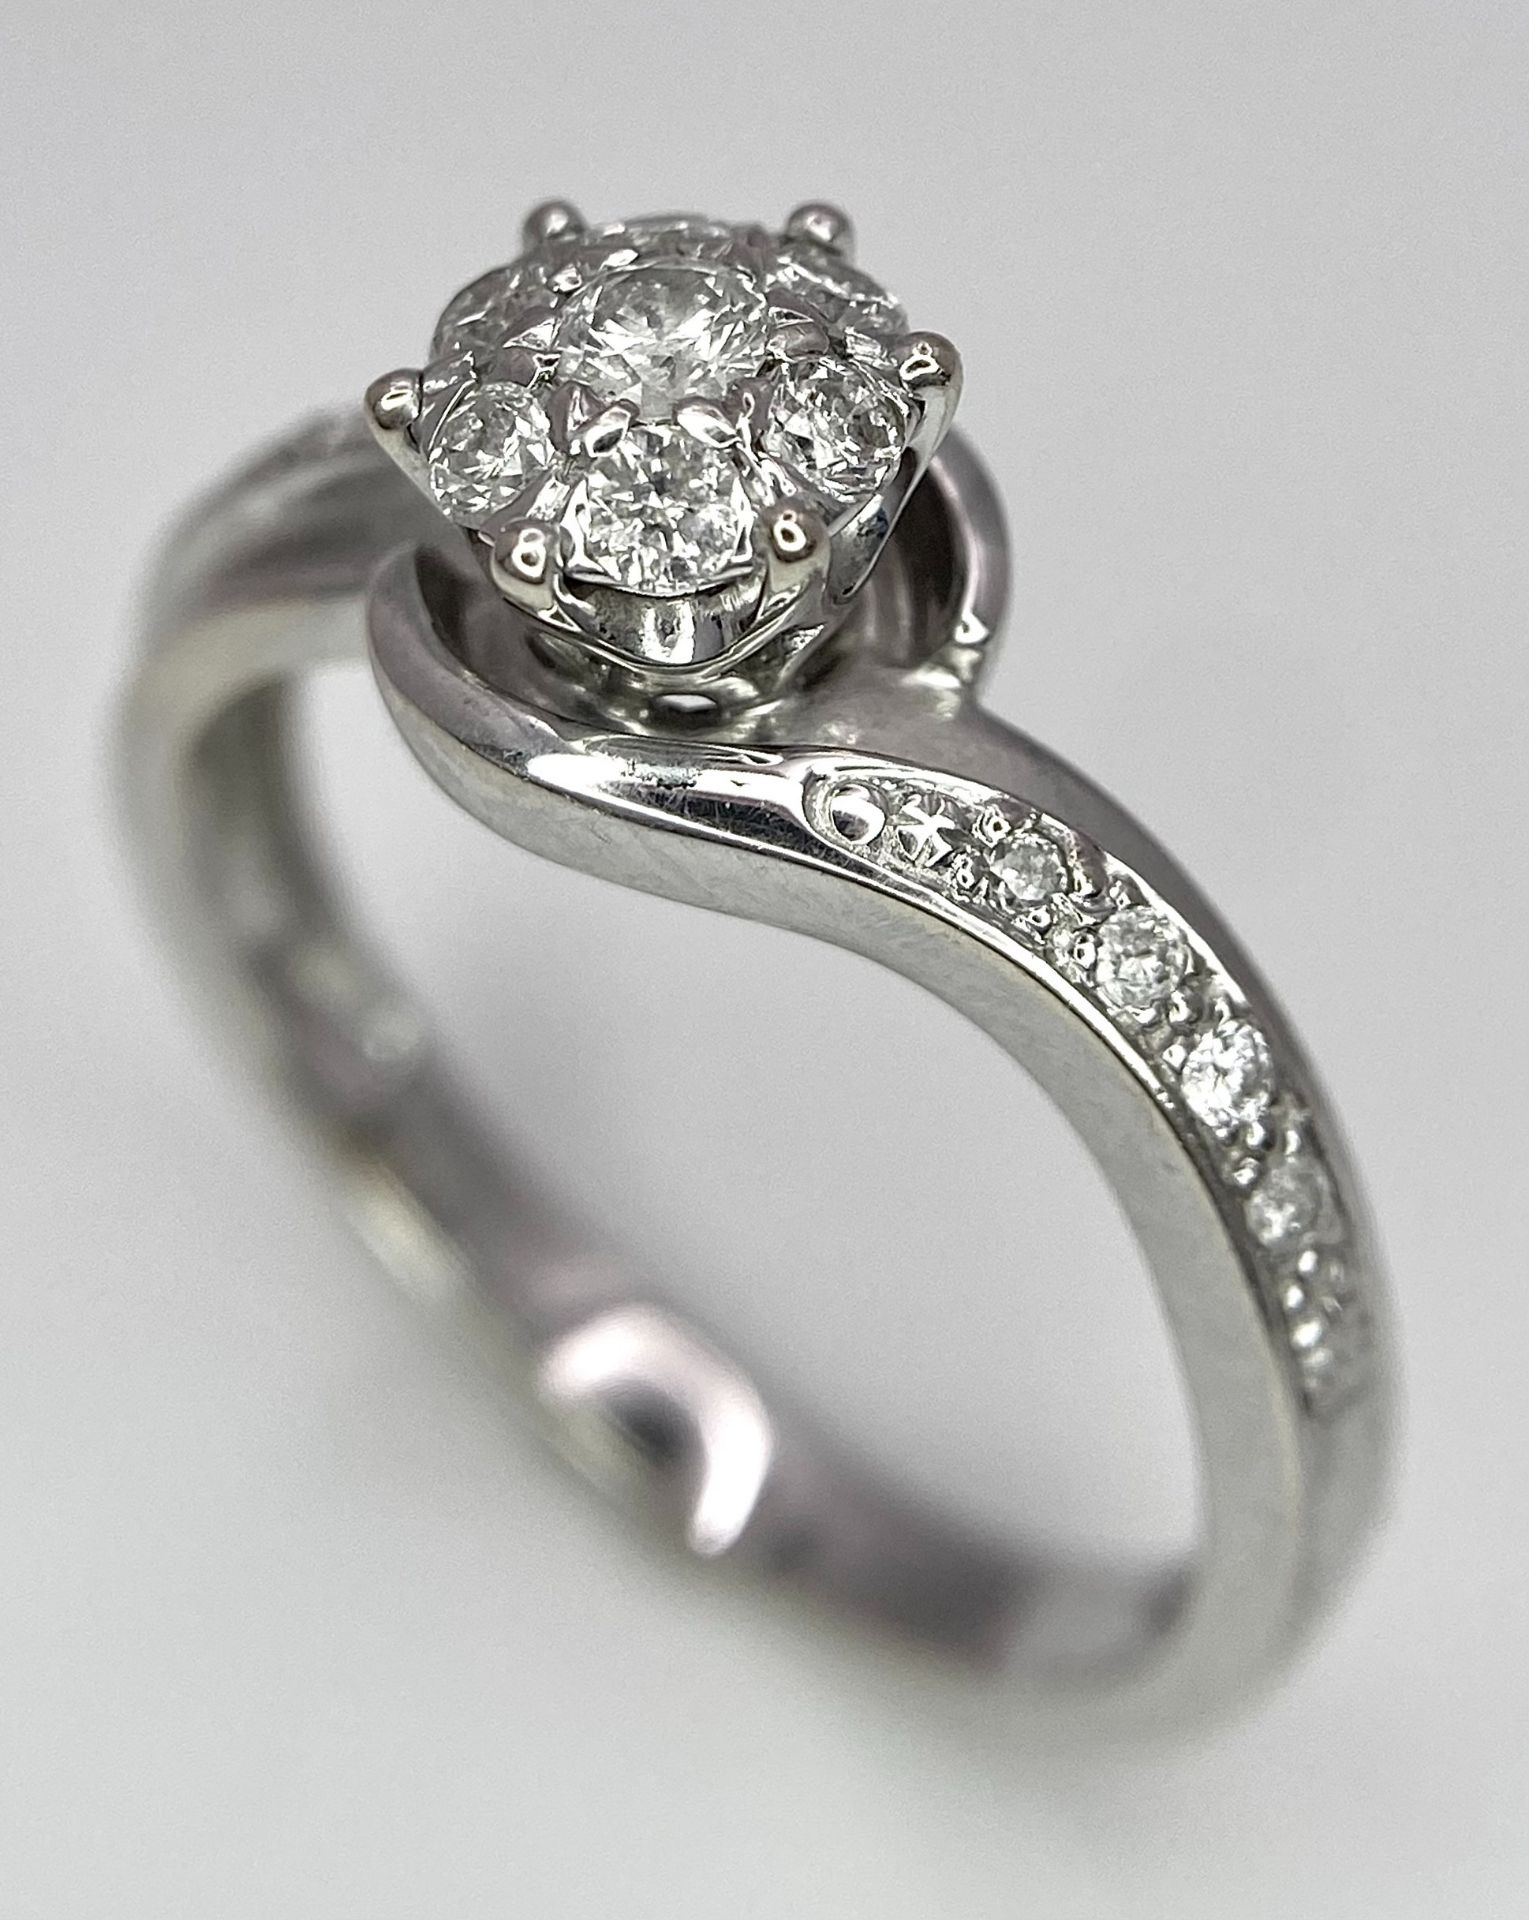 A 9K WHITE GOLD DIAMOND RING. 0.25ctw, Size L, 2.3g total weight. Ref: 8034 - Image 2 of 6